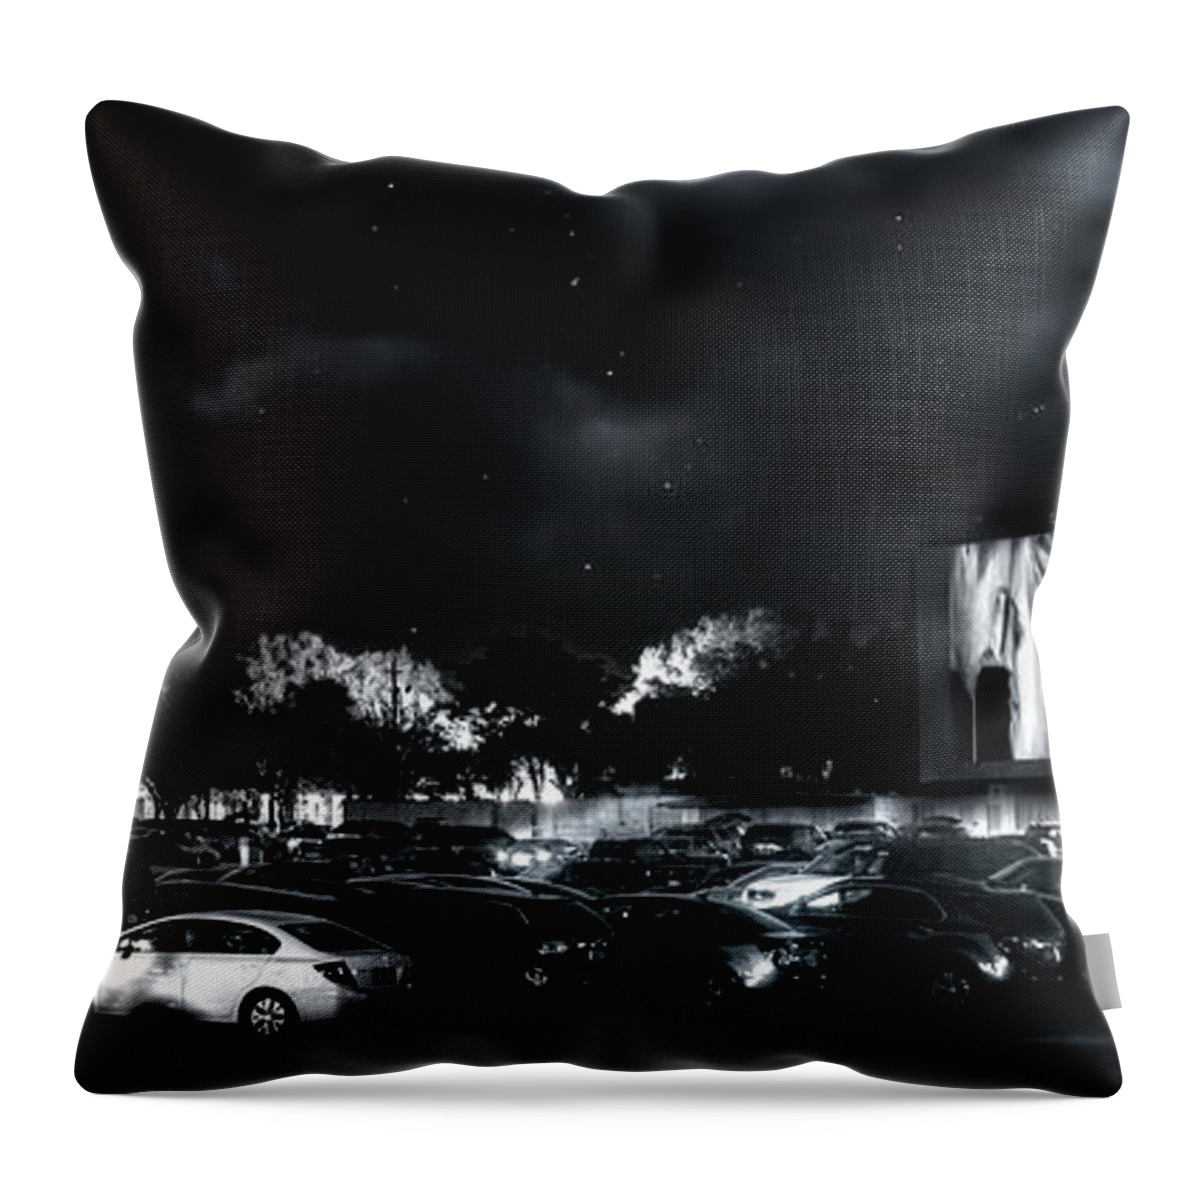 Drive In Throw Pillow featuring the photograph The Swap Shop Drive In by Mark Andrew Thomas